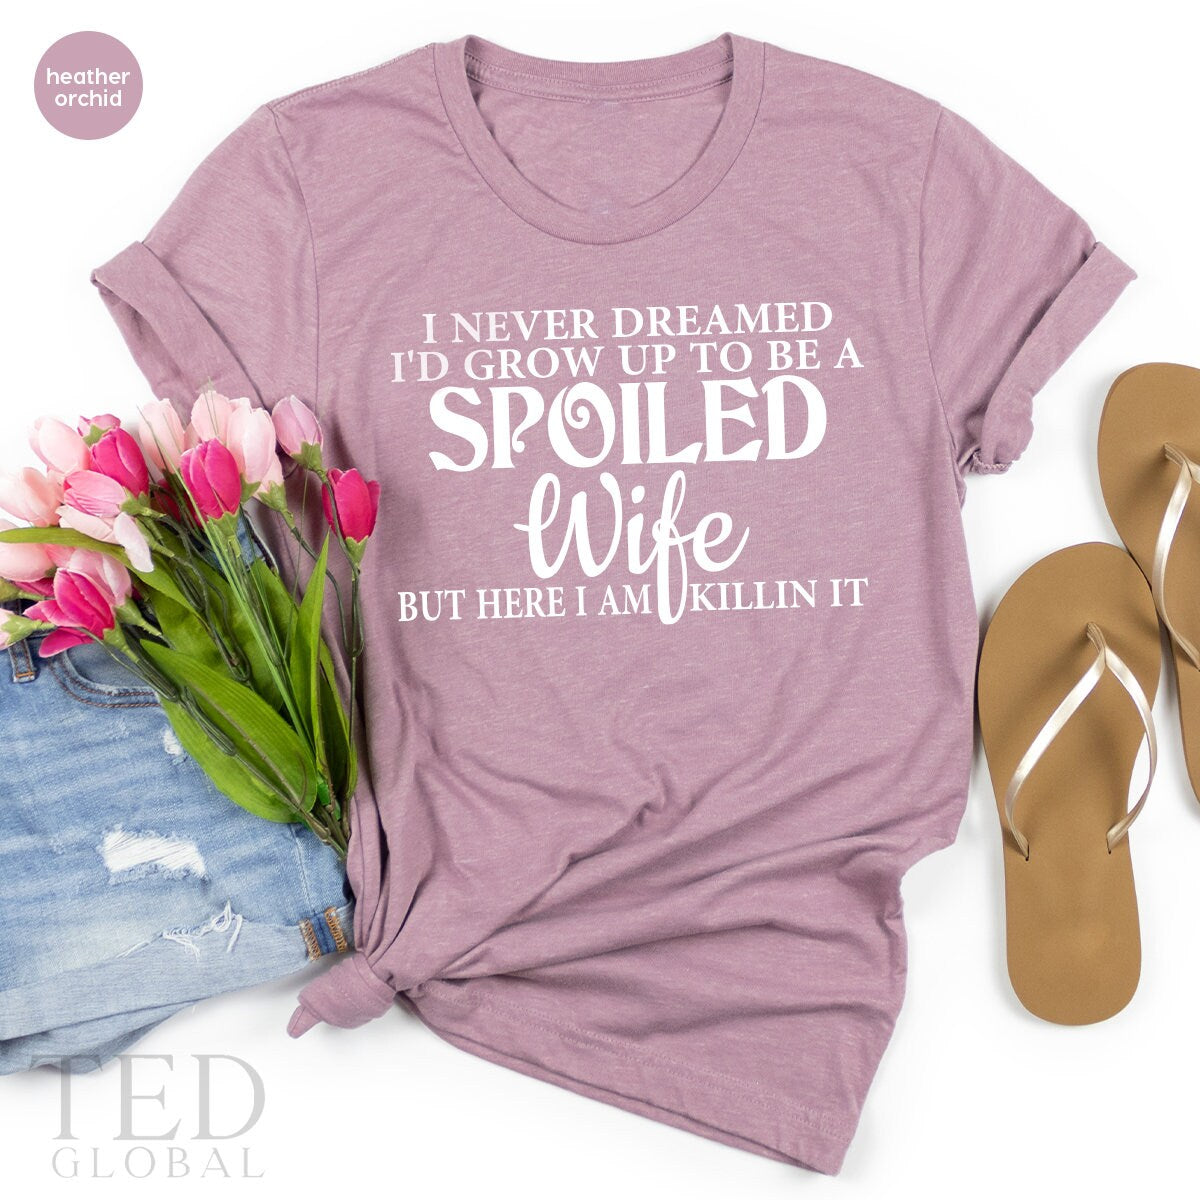 Best Wife T-Shirt, Funny Wife TShirt, Spoiled Wife T Shirt, Gift From Husband, Wife Birthday Shirt, Cool Mom TShirt, Mothers Day Shirt - Fastdeliverytees.com